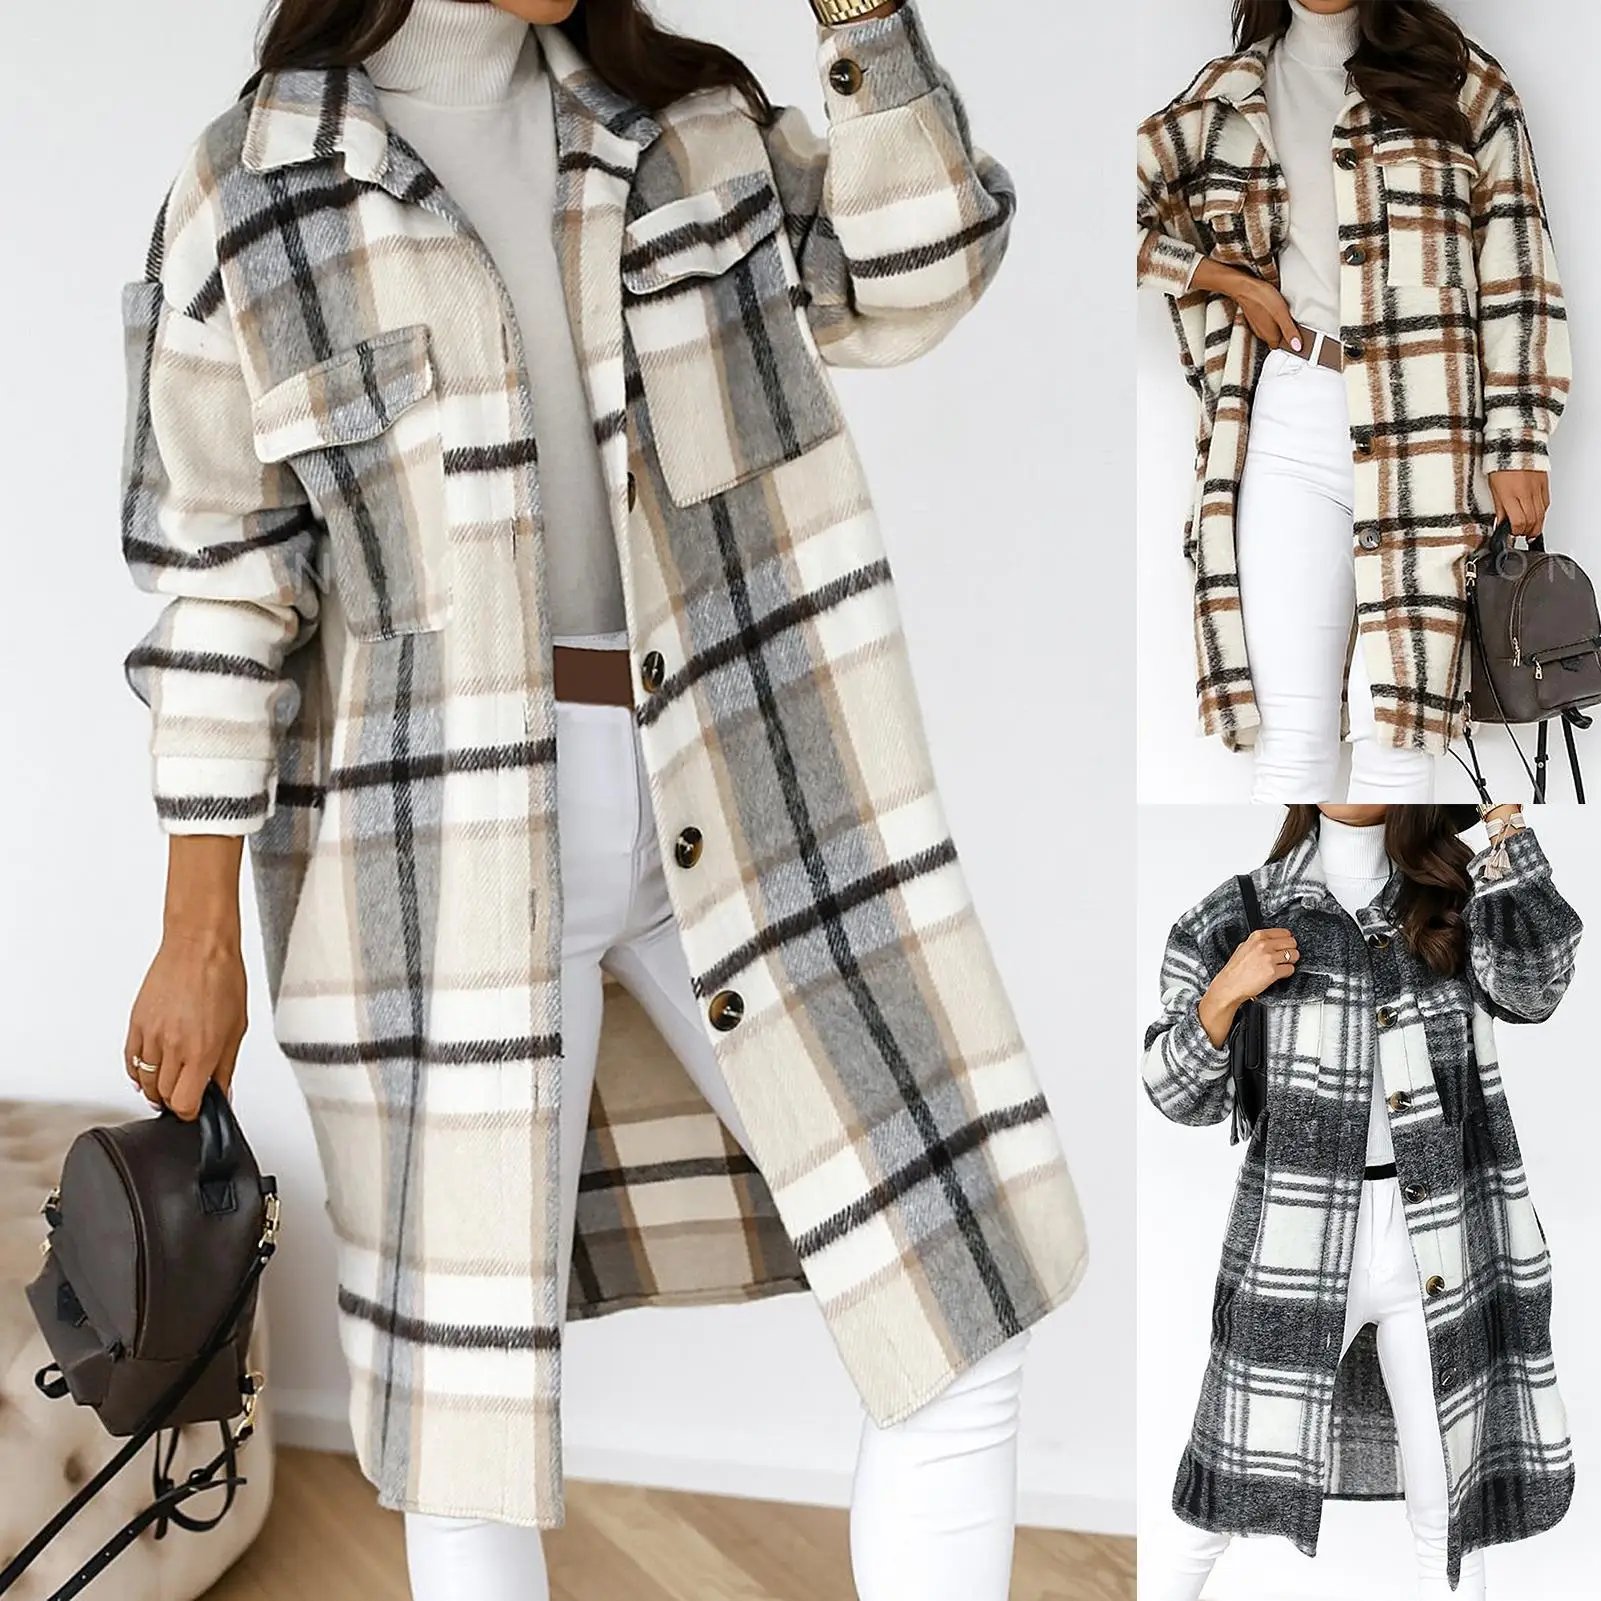 HOT SALES！！！New in Jacket Autumn Winter Women Plaid Buttons Long Sleeve Lapel Jacket Knee-length Overcoat